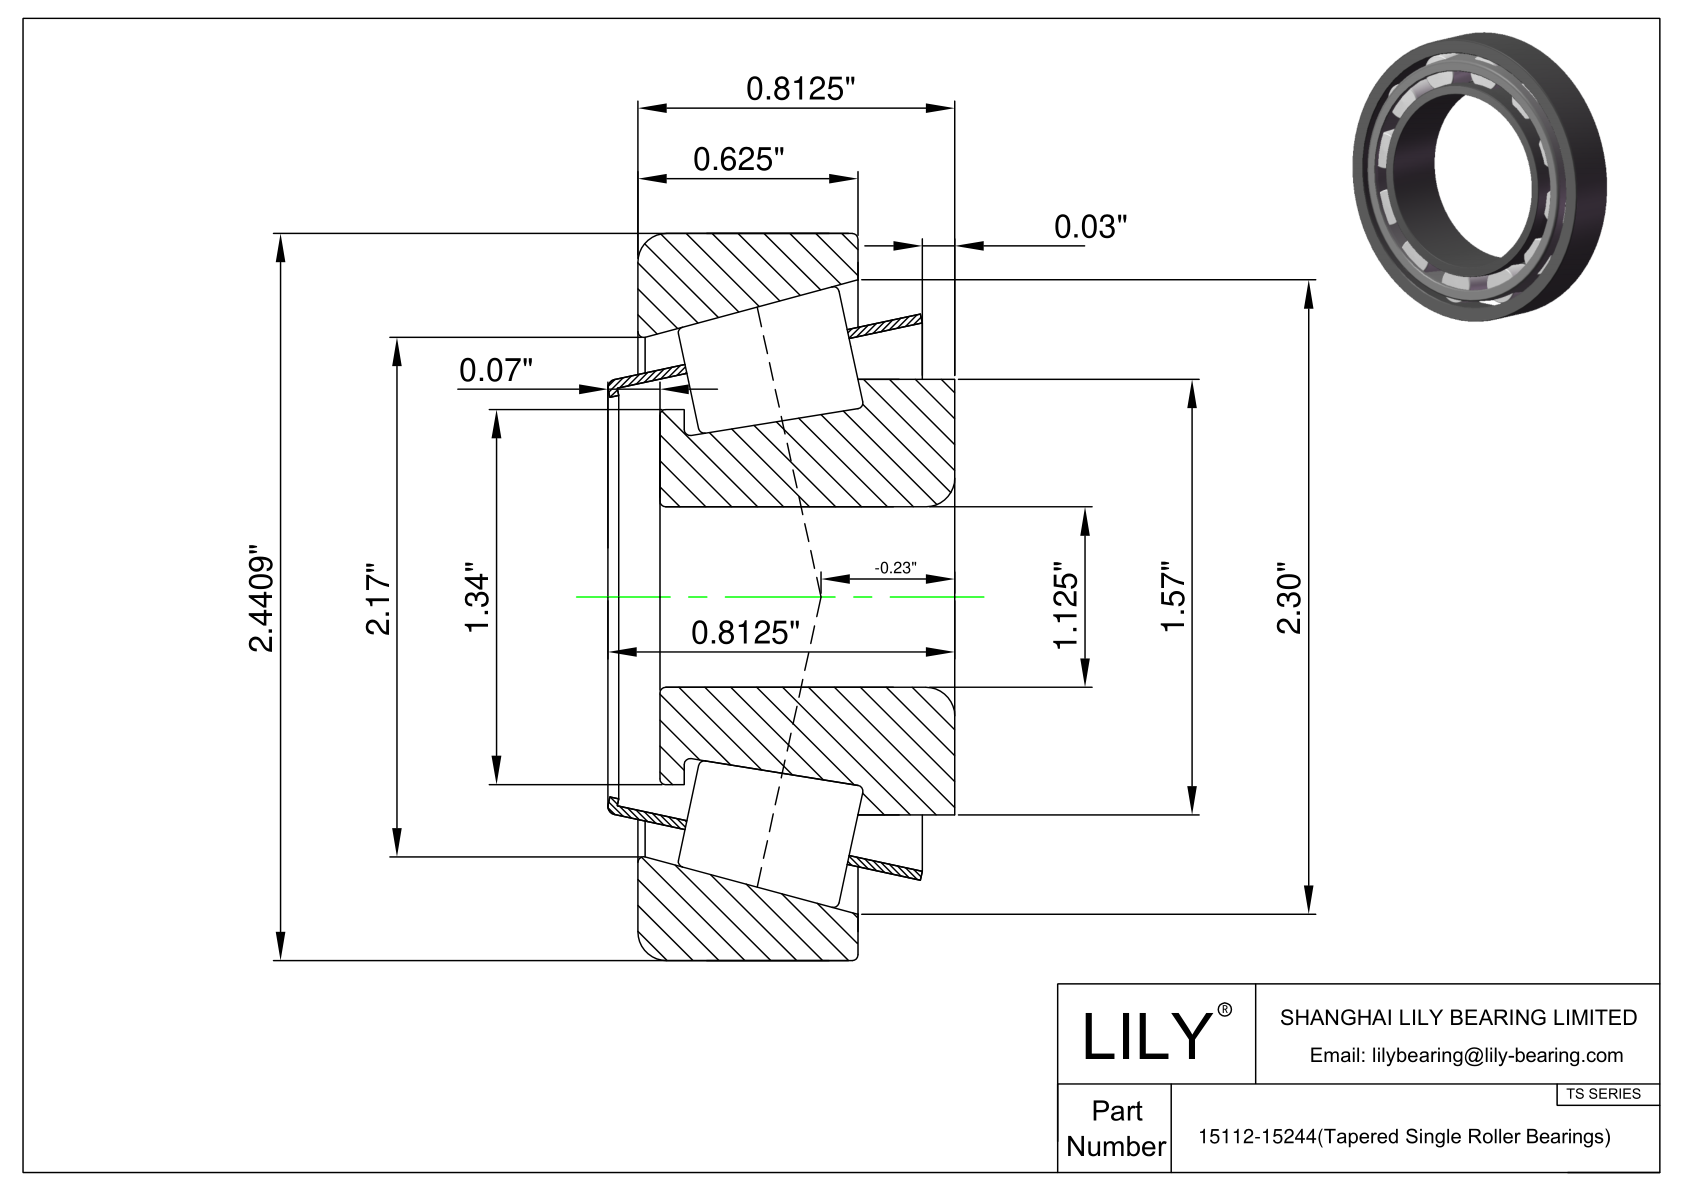 15112-15244 TS (Tapered Single Roller Bearings) (Imperial) cad drawing